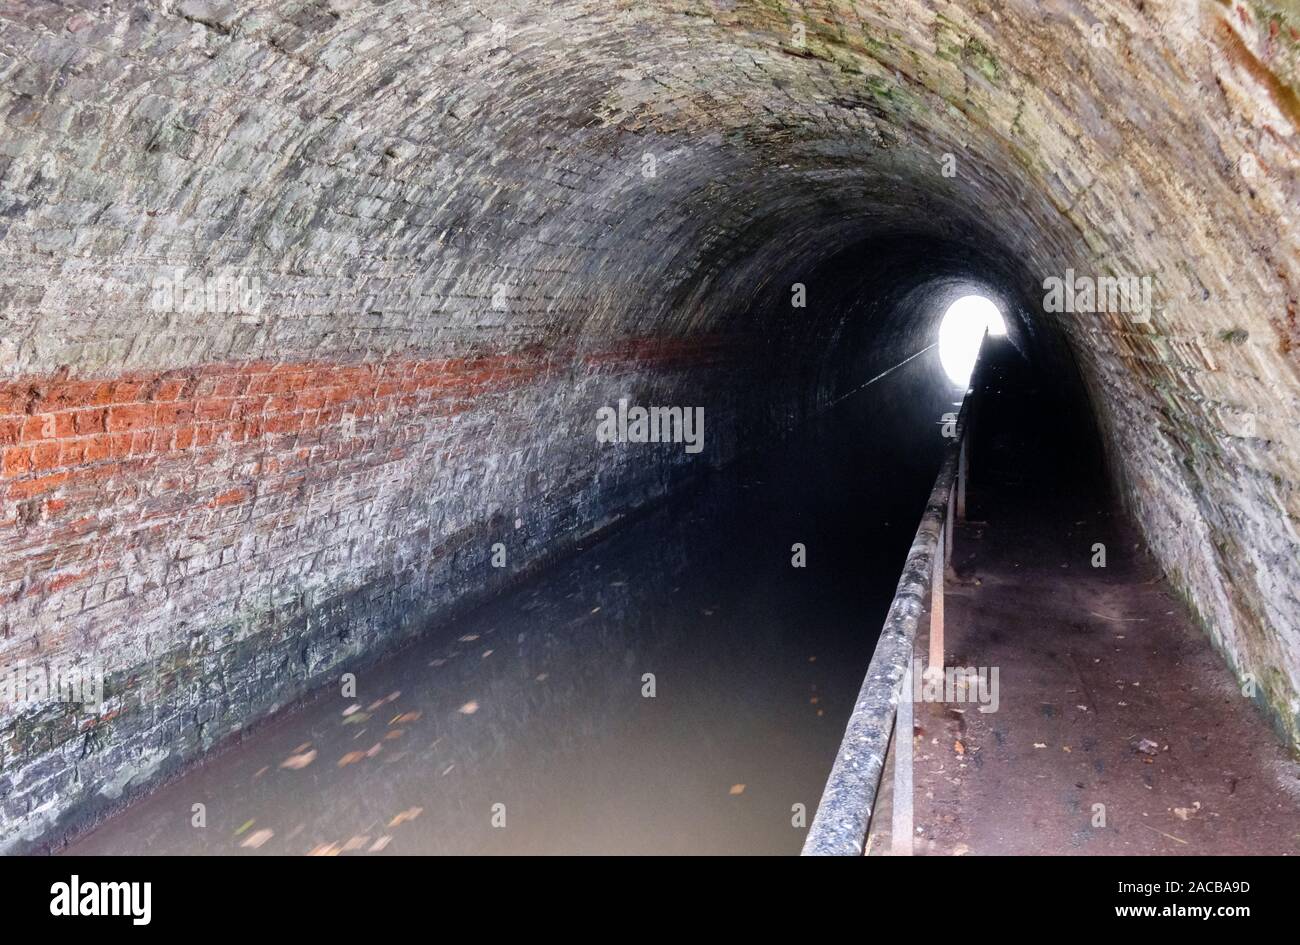 Ellesmere Tunnel on the Llangollen Branch of the Shropshire Union Canal near Ellesmere, Shropshire Stock Photo